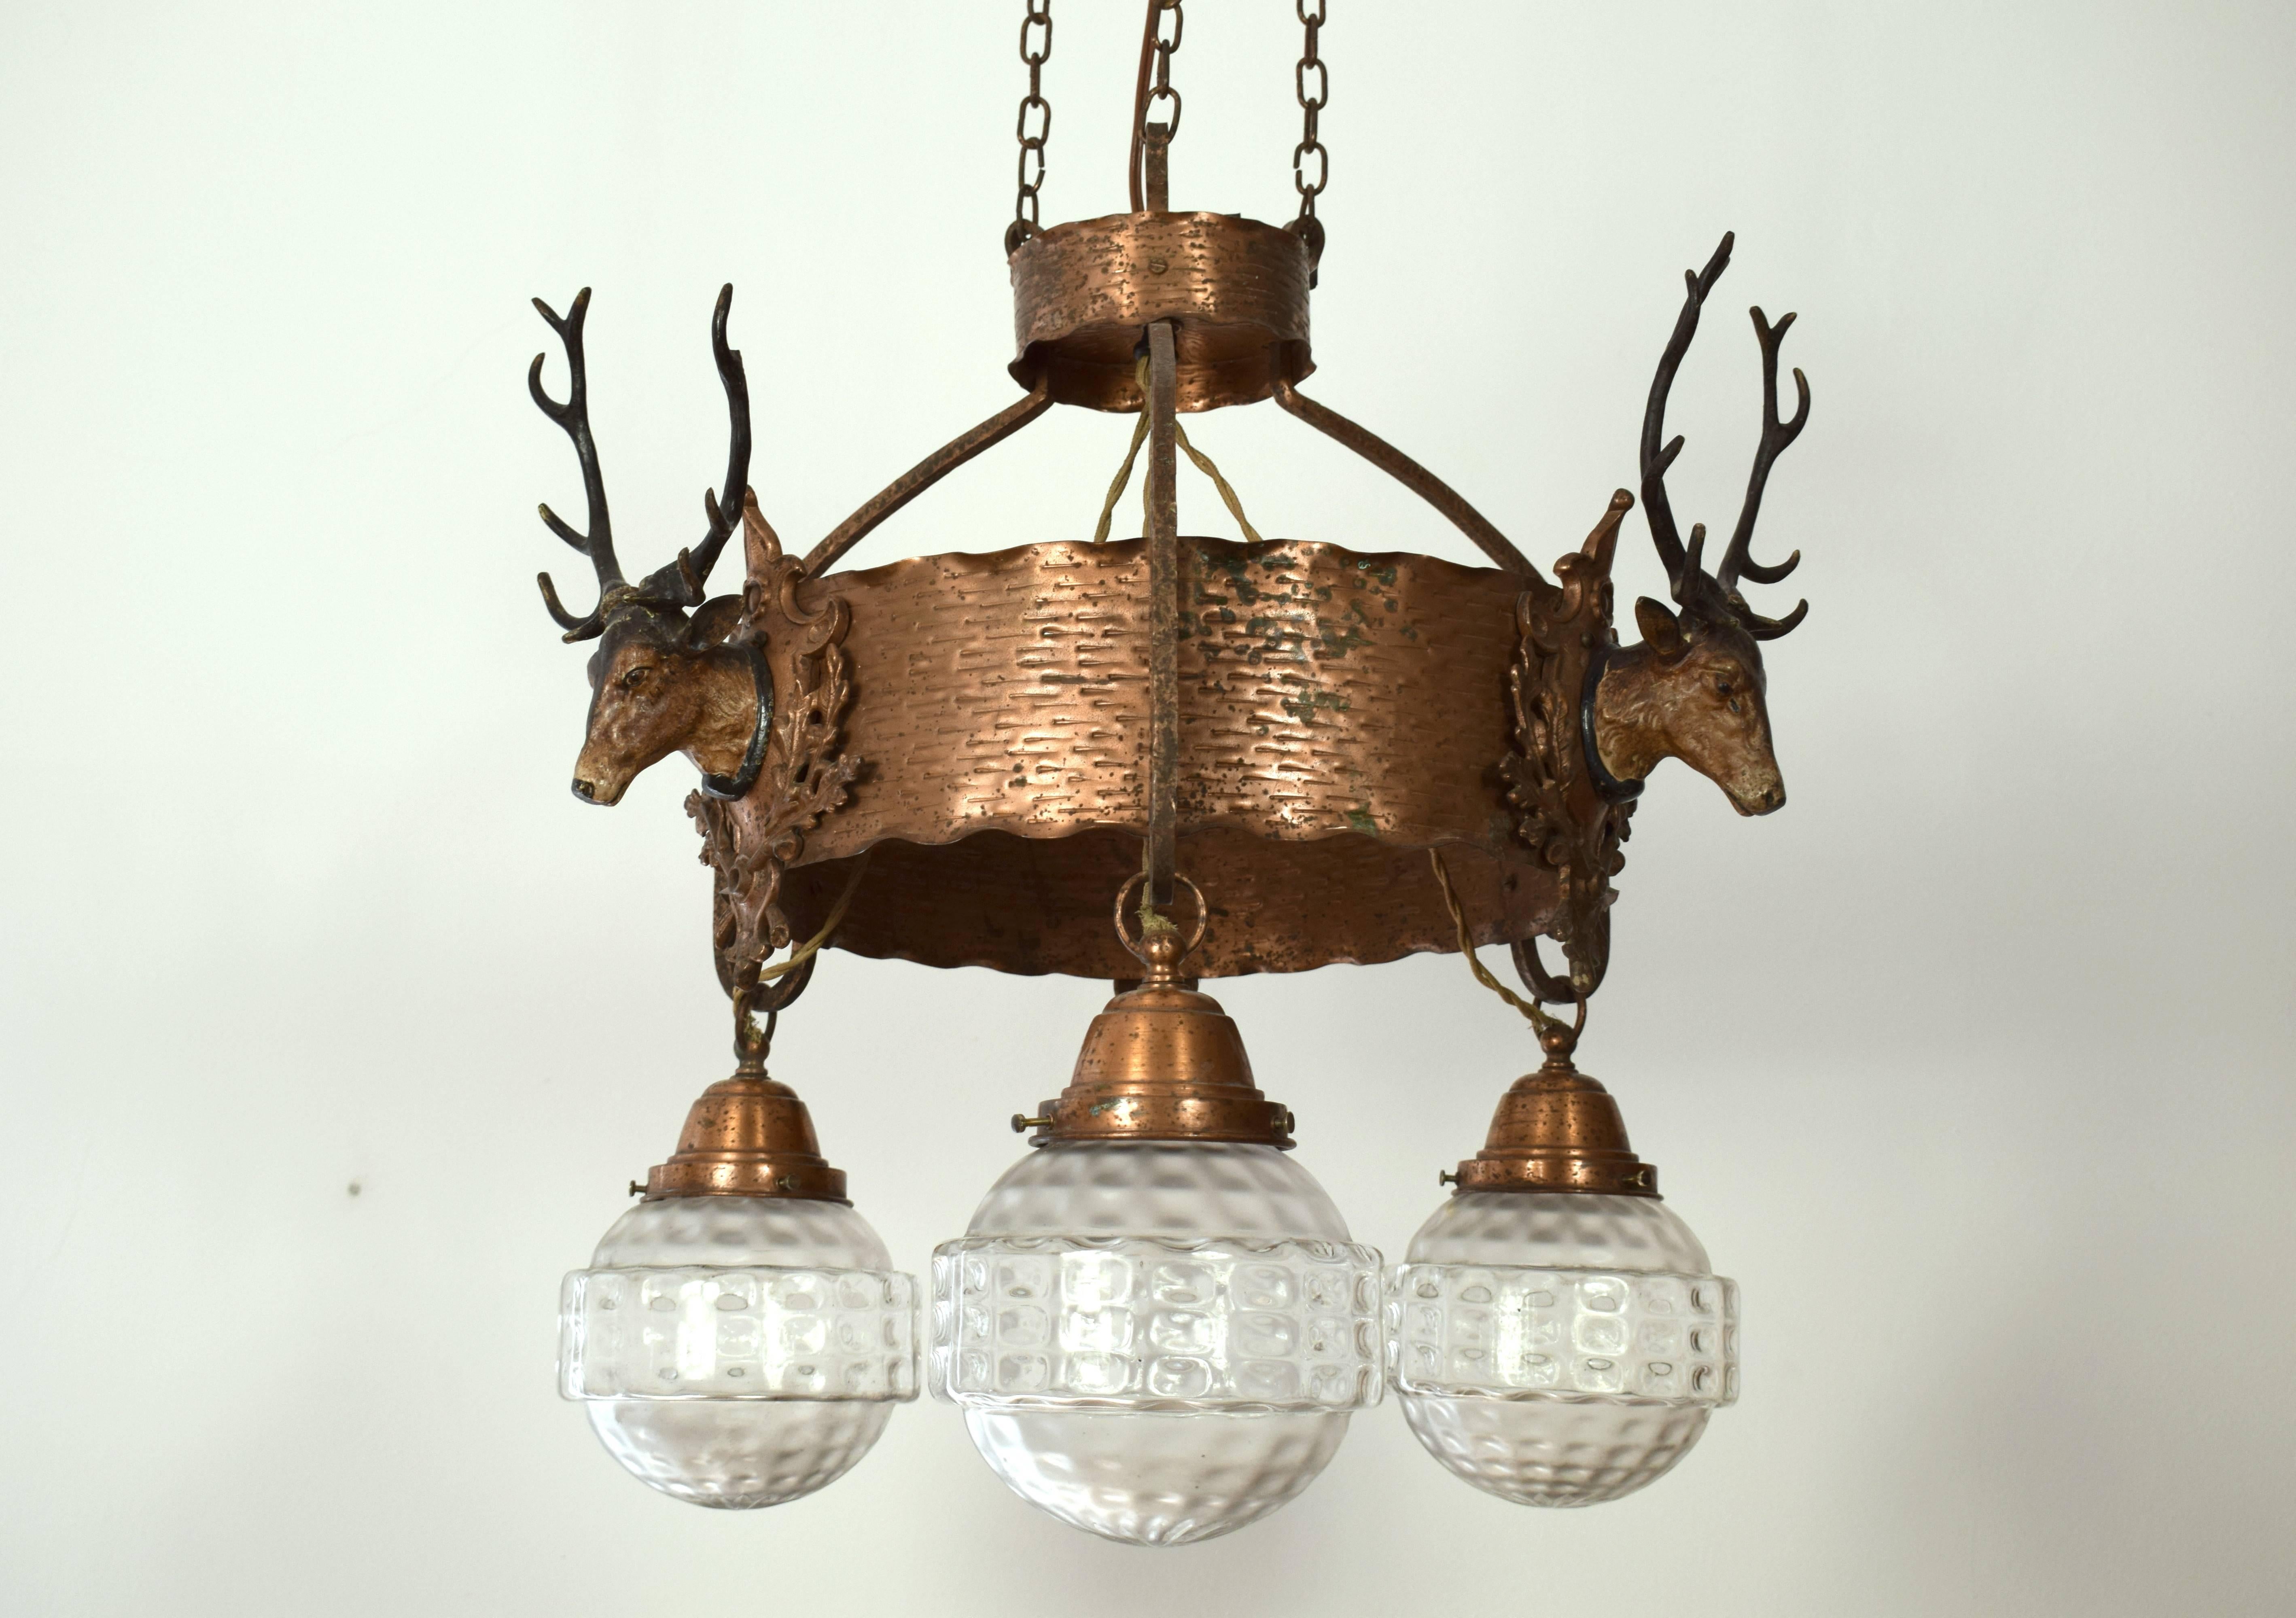 Exquisite chandelier of a hunting lodge in lower Austria. Excellent ironwork. Three sockets. Three deer from metal and cold painted. Material: Copper (or wrought iron copper plated). Very good original condition!
The glass shades were obtained and